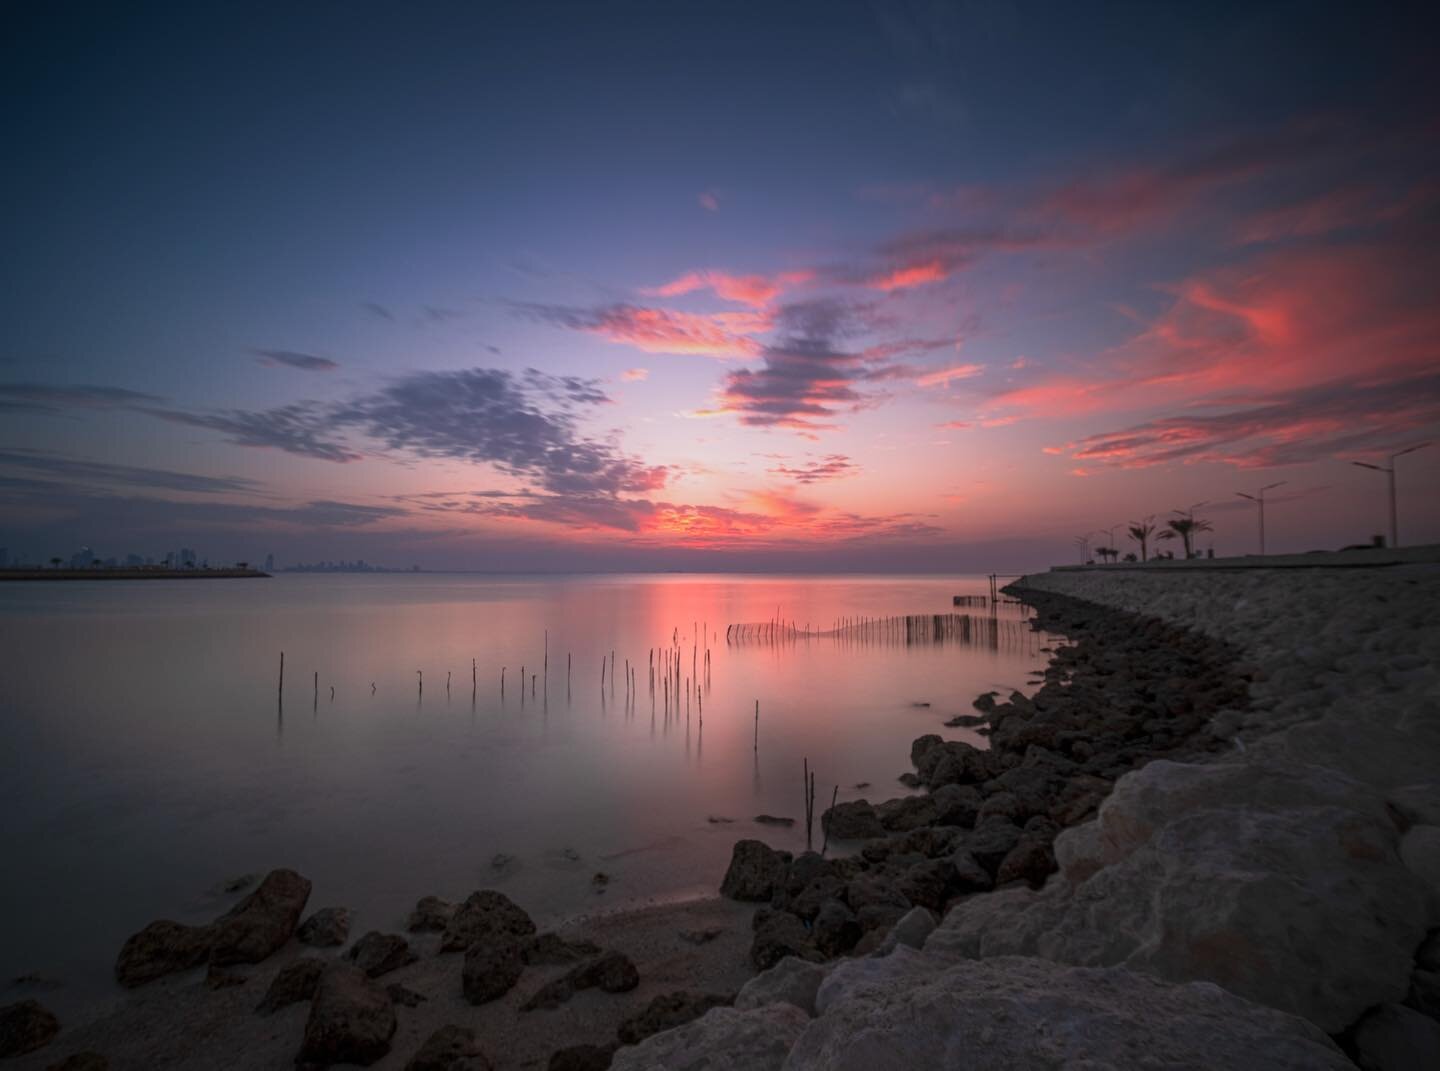 Gorgeous sunset ..have a great weekend everyone #longexposure #nisifilters #bahrain @localbh @bahrain @bahrain.pic #غروب #instagood #instamood @igworldclub_sunset